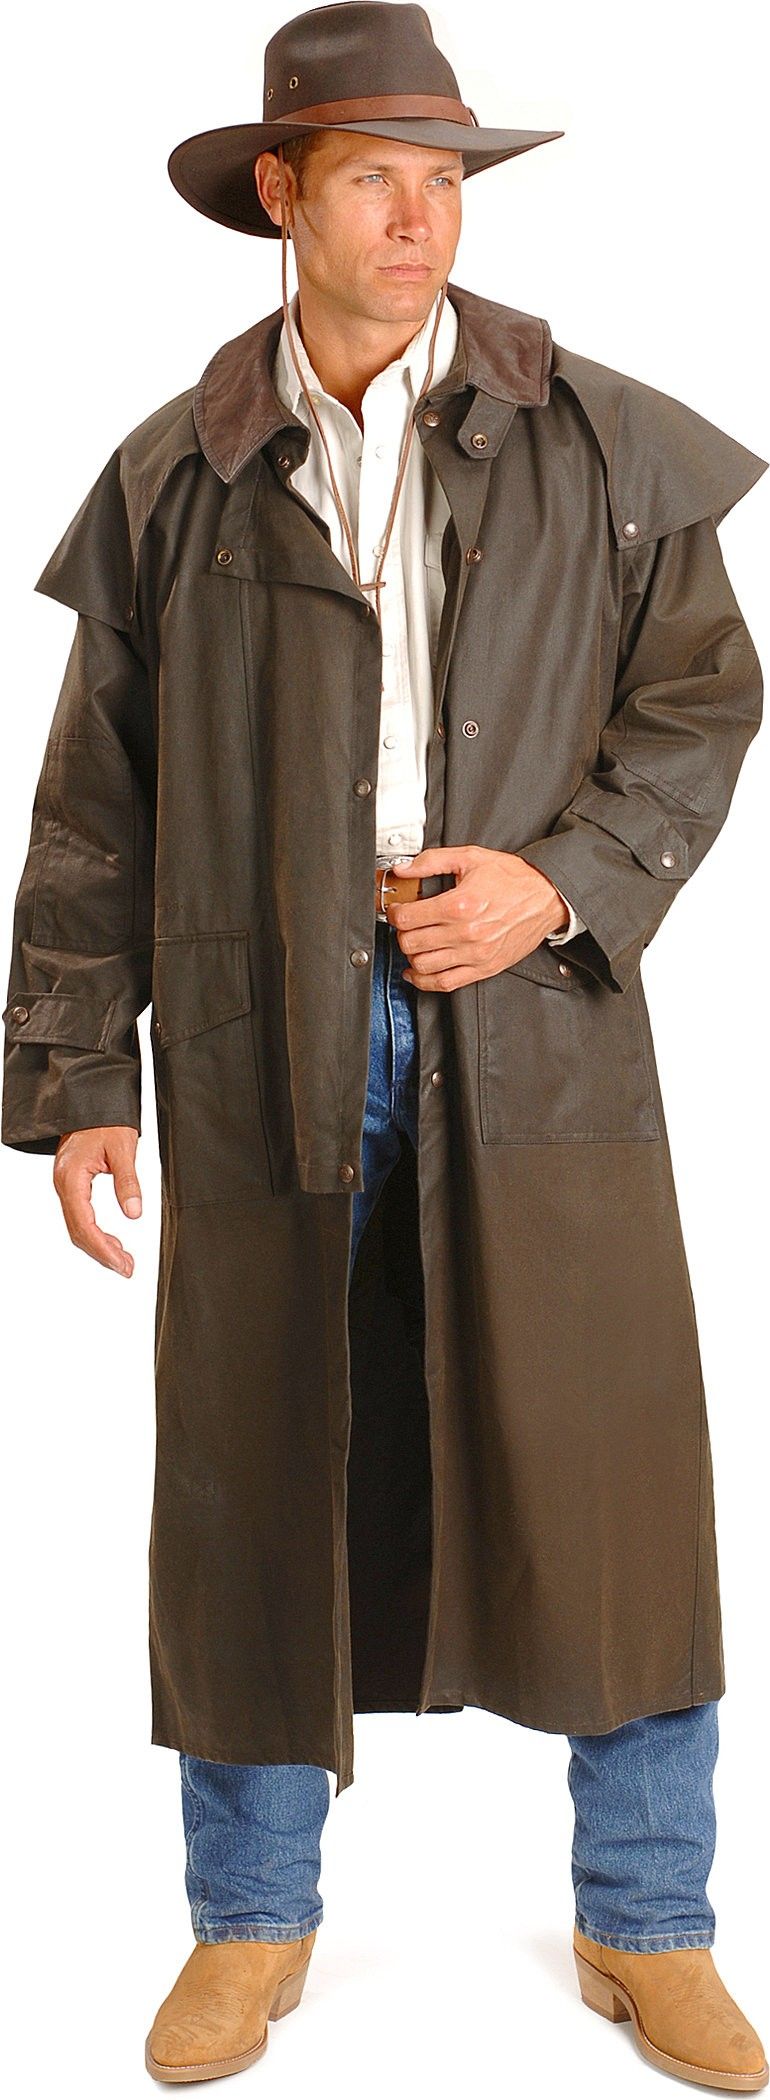 Outback Trading Company Oilskin Low Rider Duster Jacket